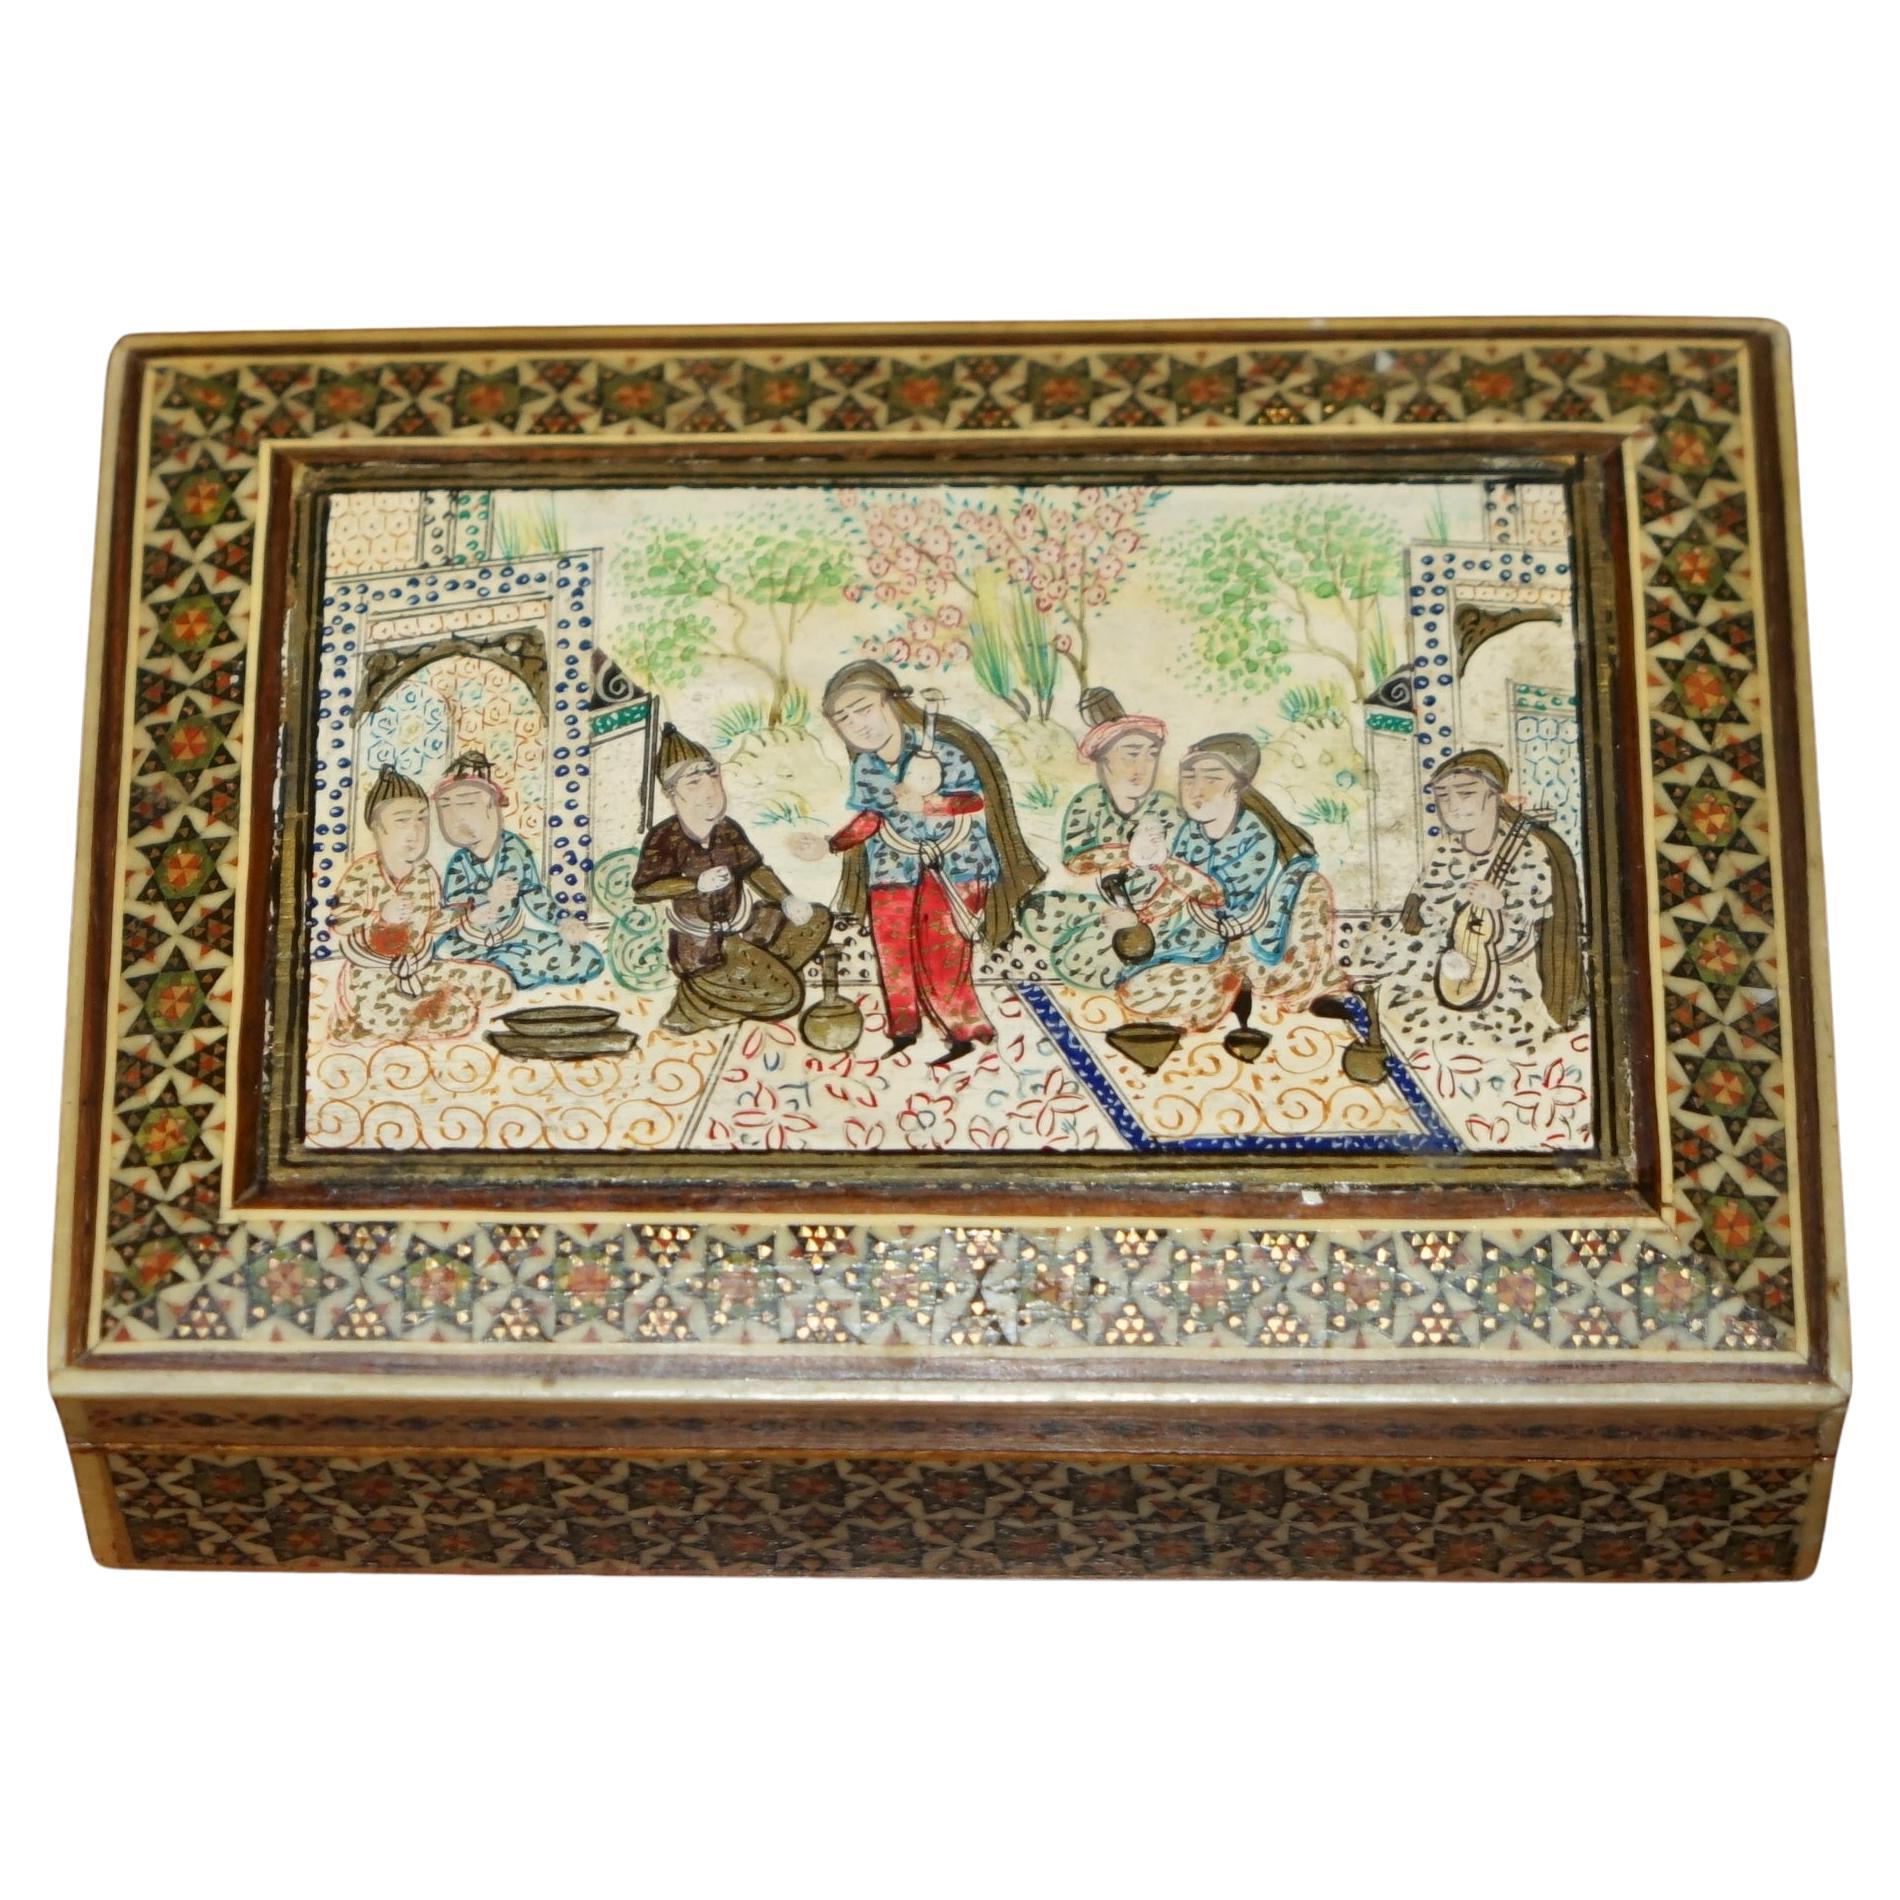 FINE ANTIQUE PERSIAN CIGARETTE BOX DEPICTING ORIENTAL CHINESE LOOKING PEOPLE im Angebot